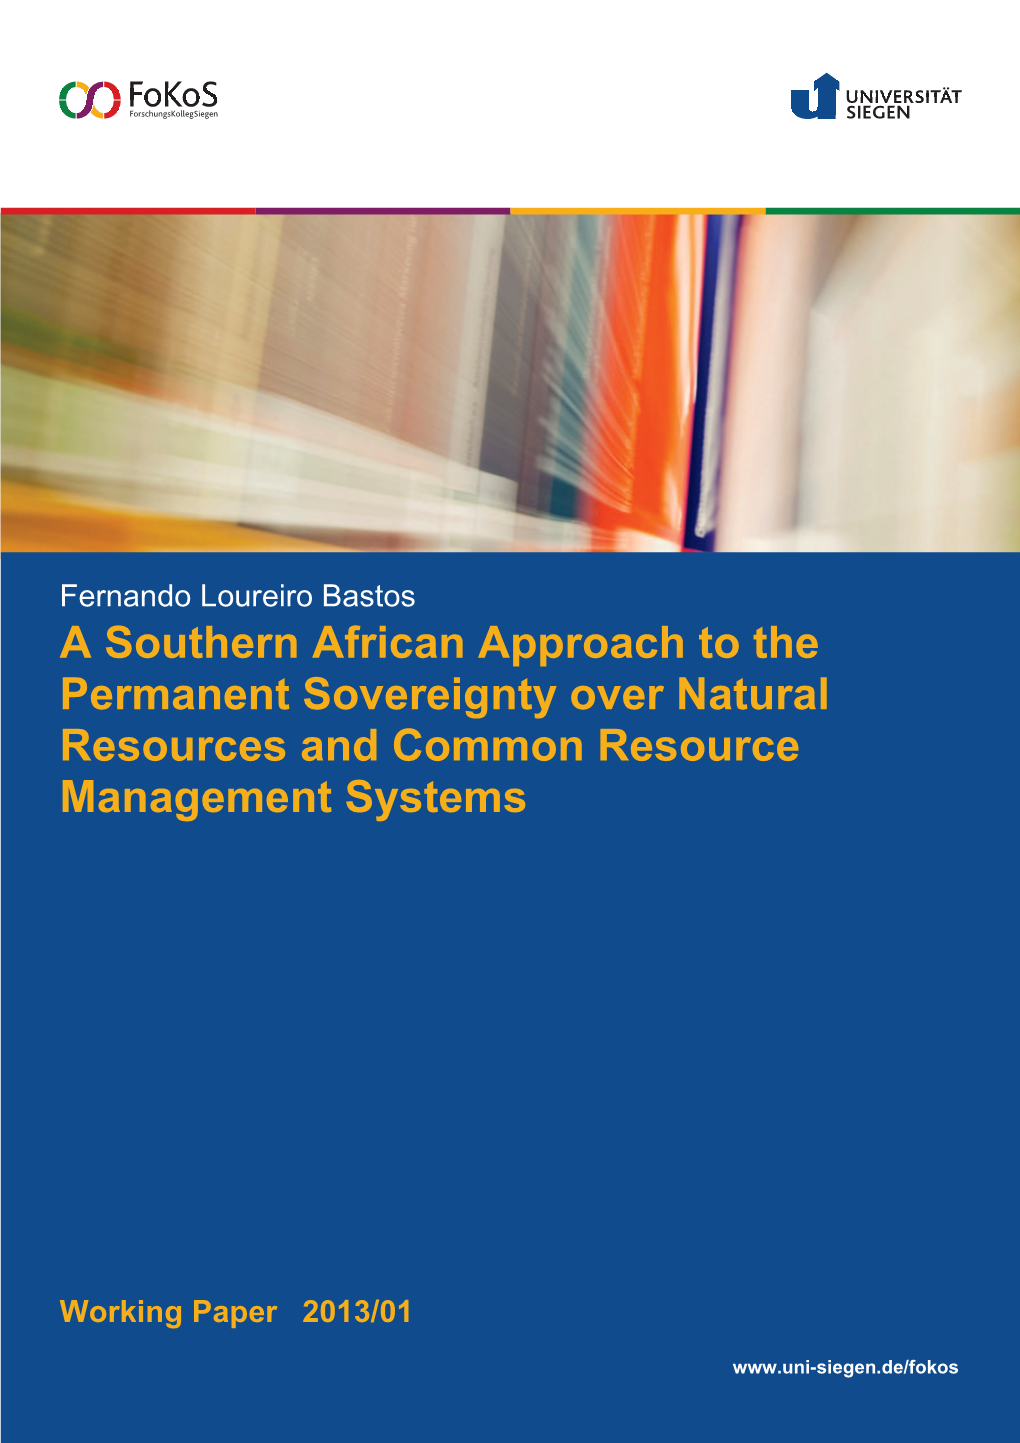 A Southern African Approach to the Permanent Sovereignty Over Natural Resources and Common Resource Management Systems